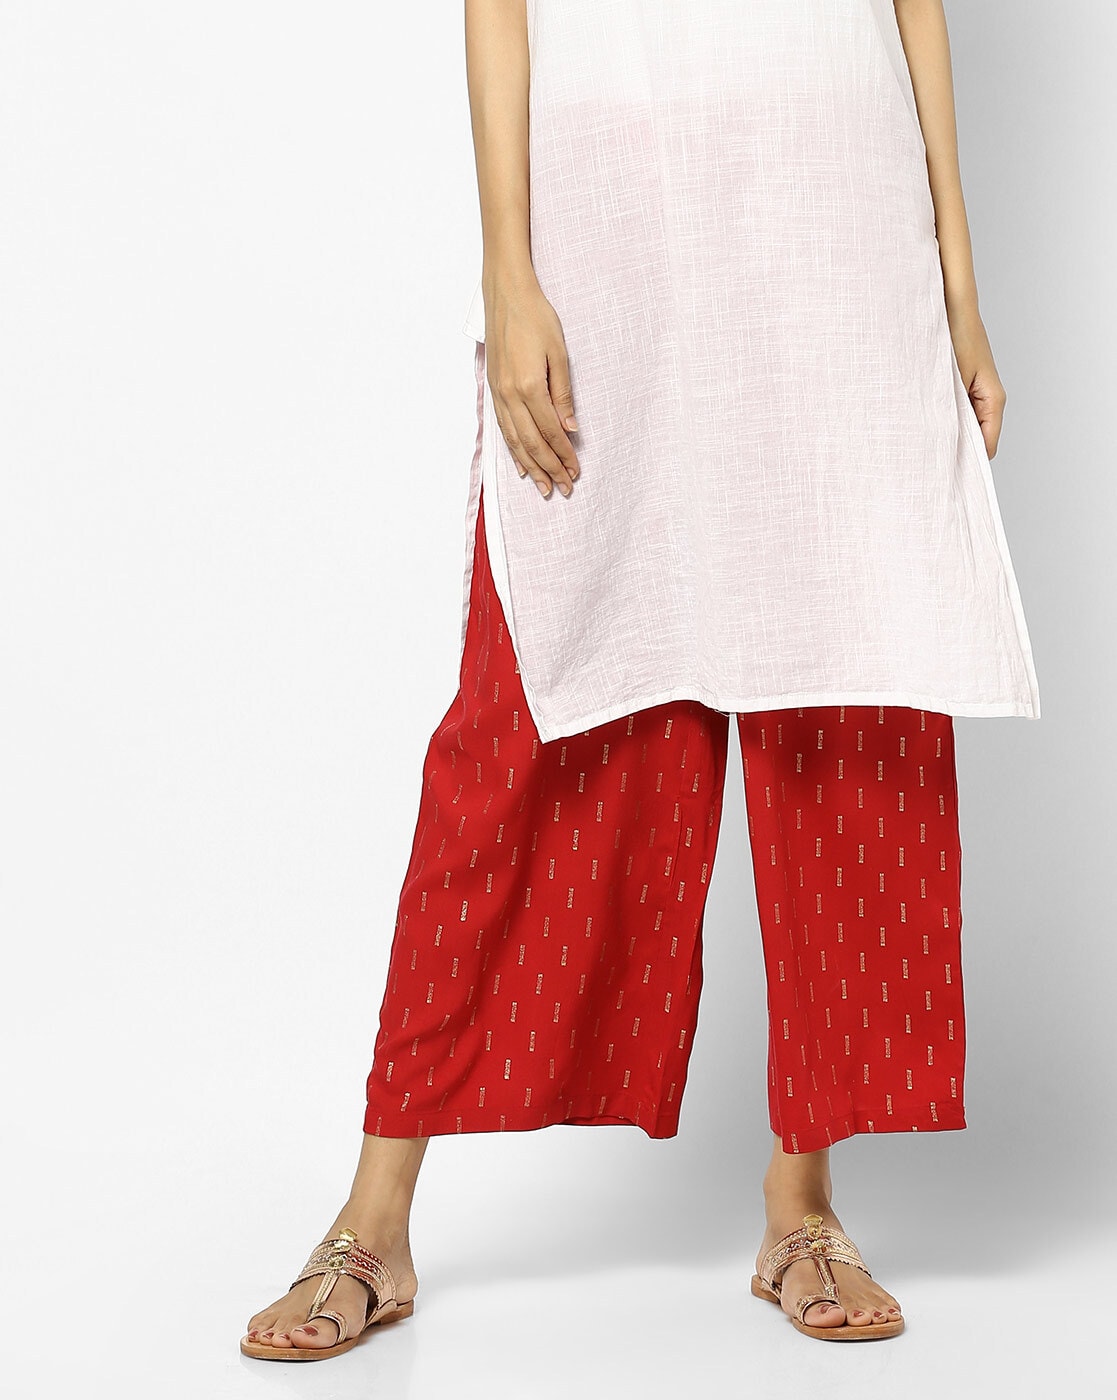 Embroidery Work Solid Red Kurti with Palazzo Pants